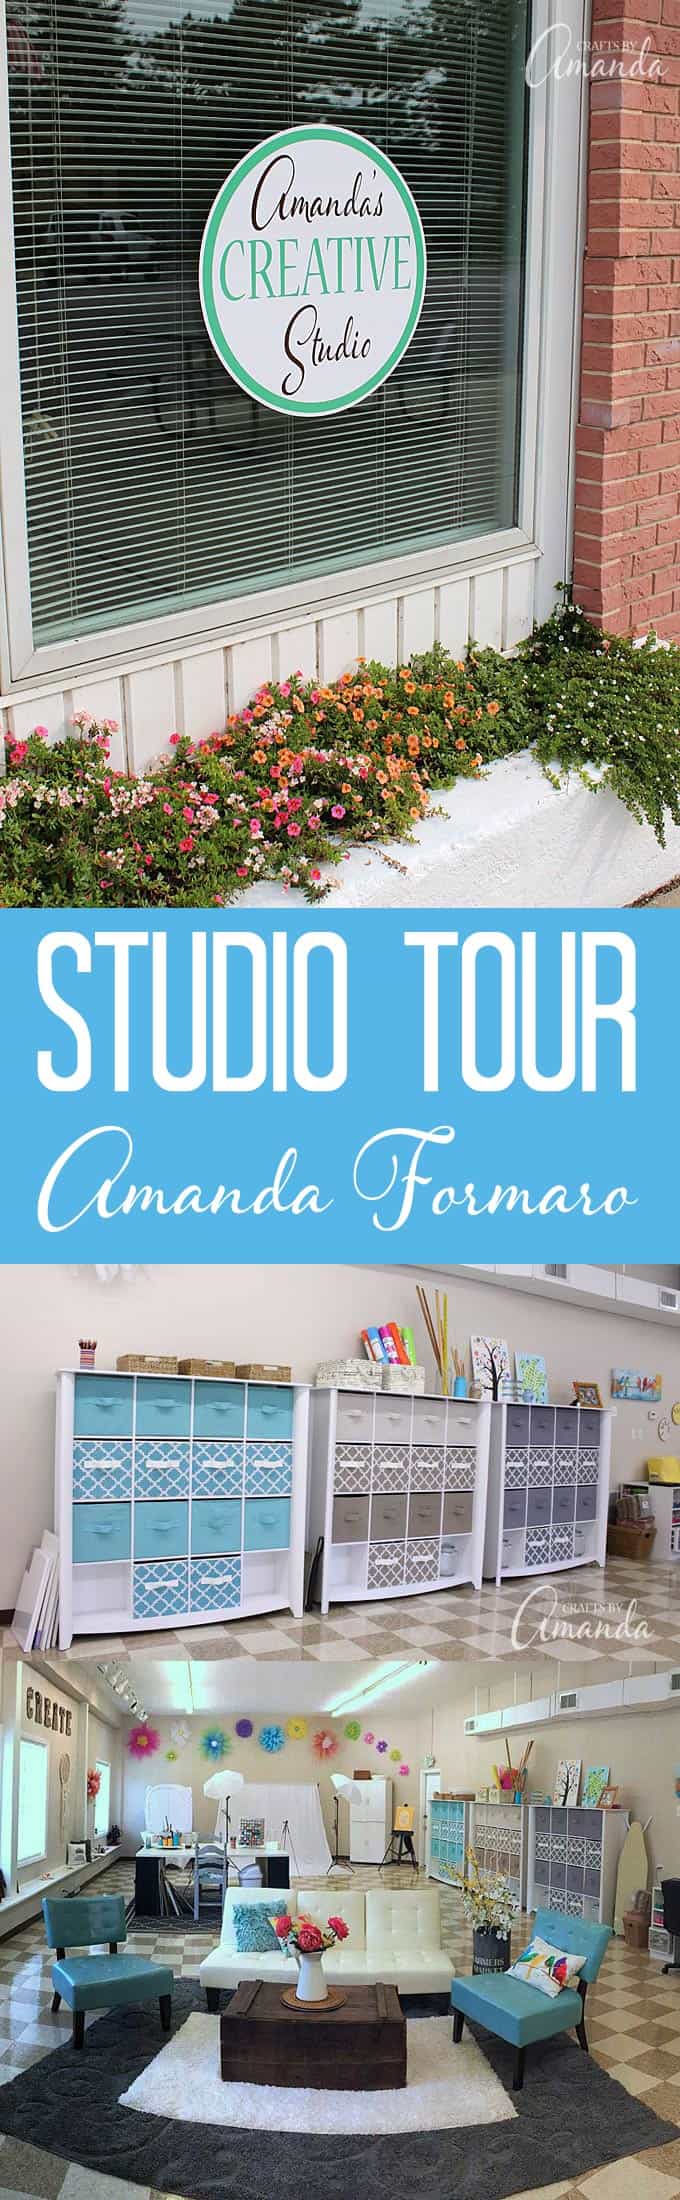 I'm so excited to finally be able to share a detailed and thorough look inside Amanda's Creative Studio! Ready for a tour?